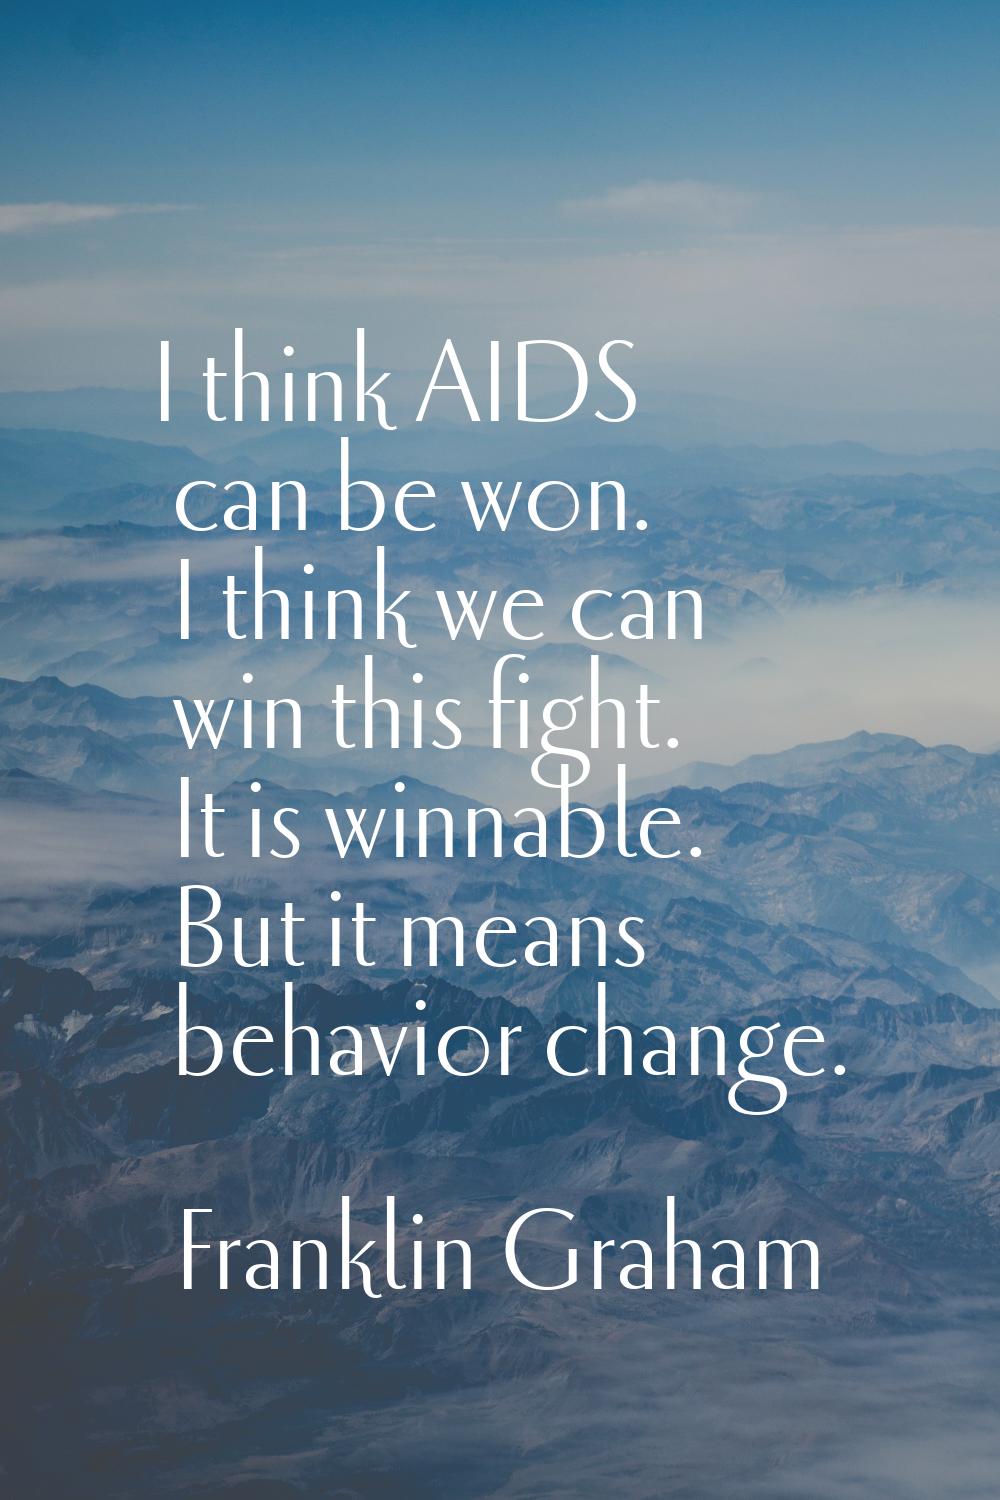 I think AIDS can be won. I think we can win this fight. It is winnable. But it means behavior chang